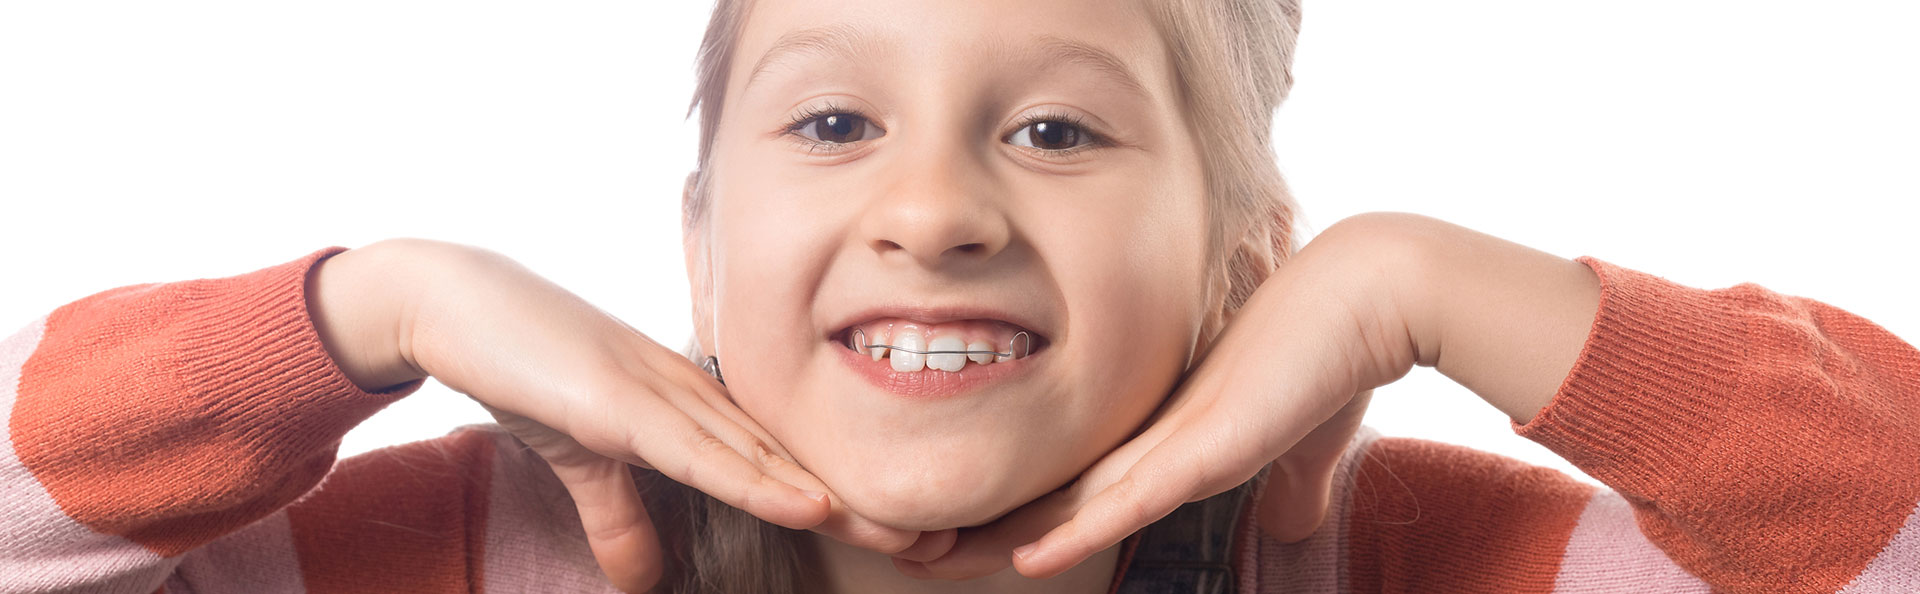 Kid smiling after Orthodontic Treatment